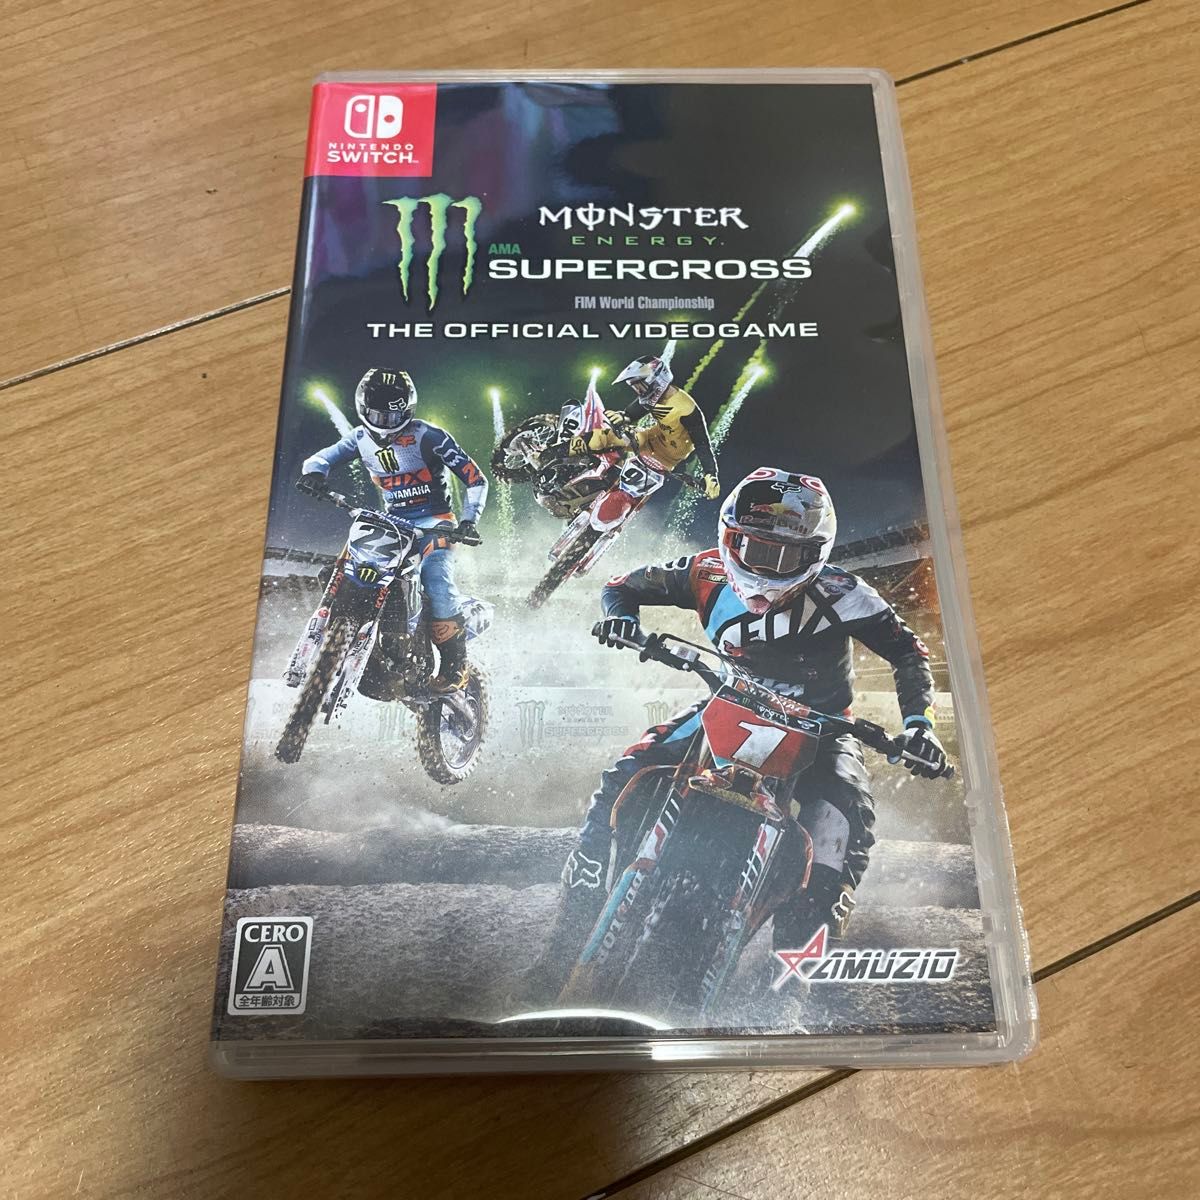 0601301【Switch】Monster Energy Supercross - The Official Videogame